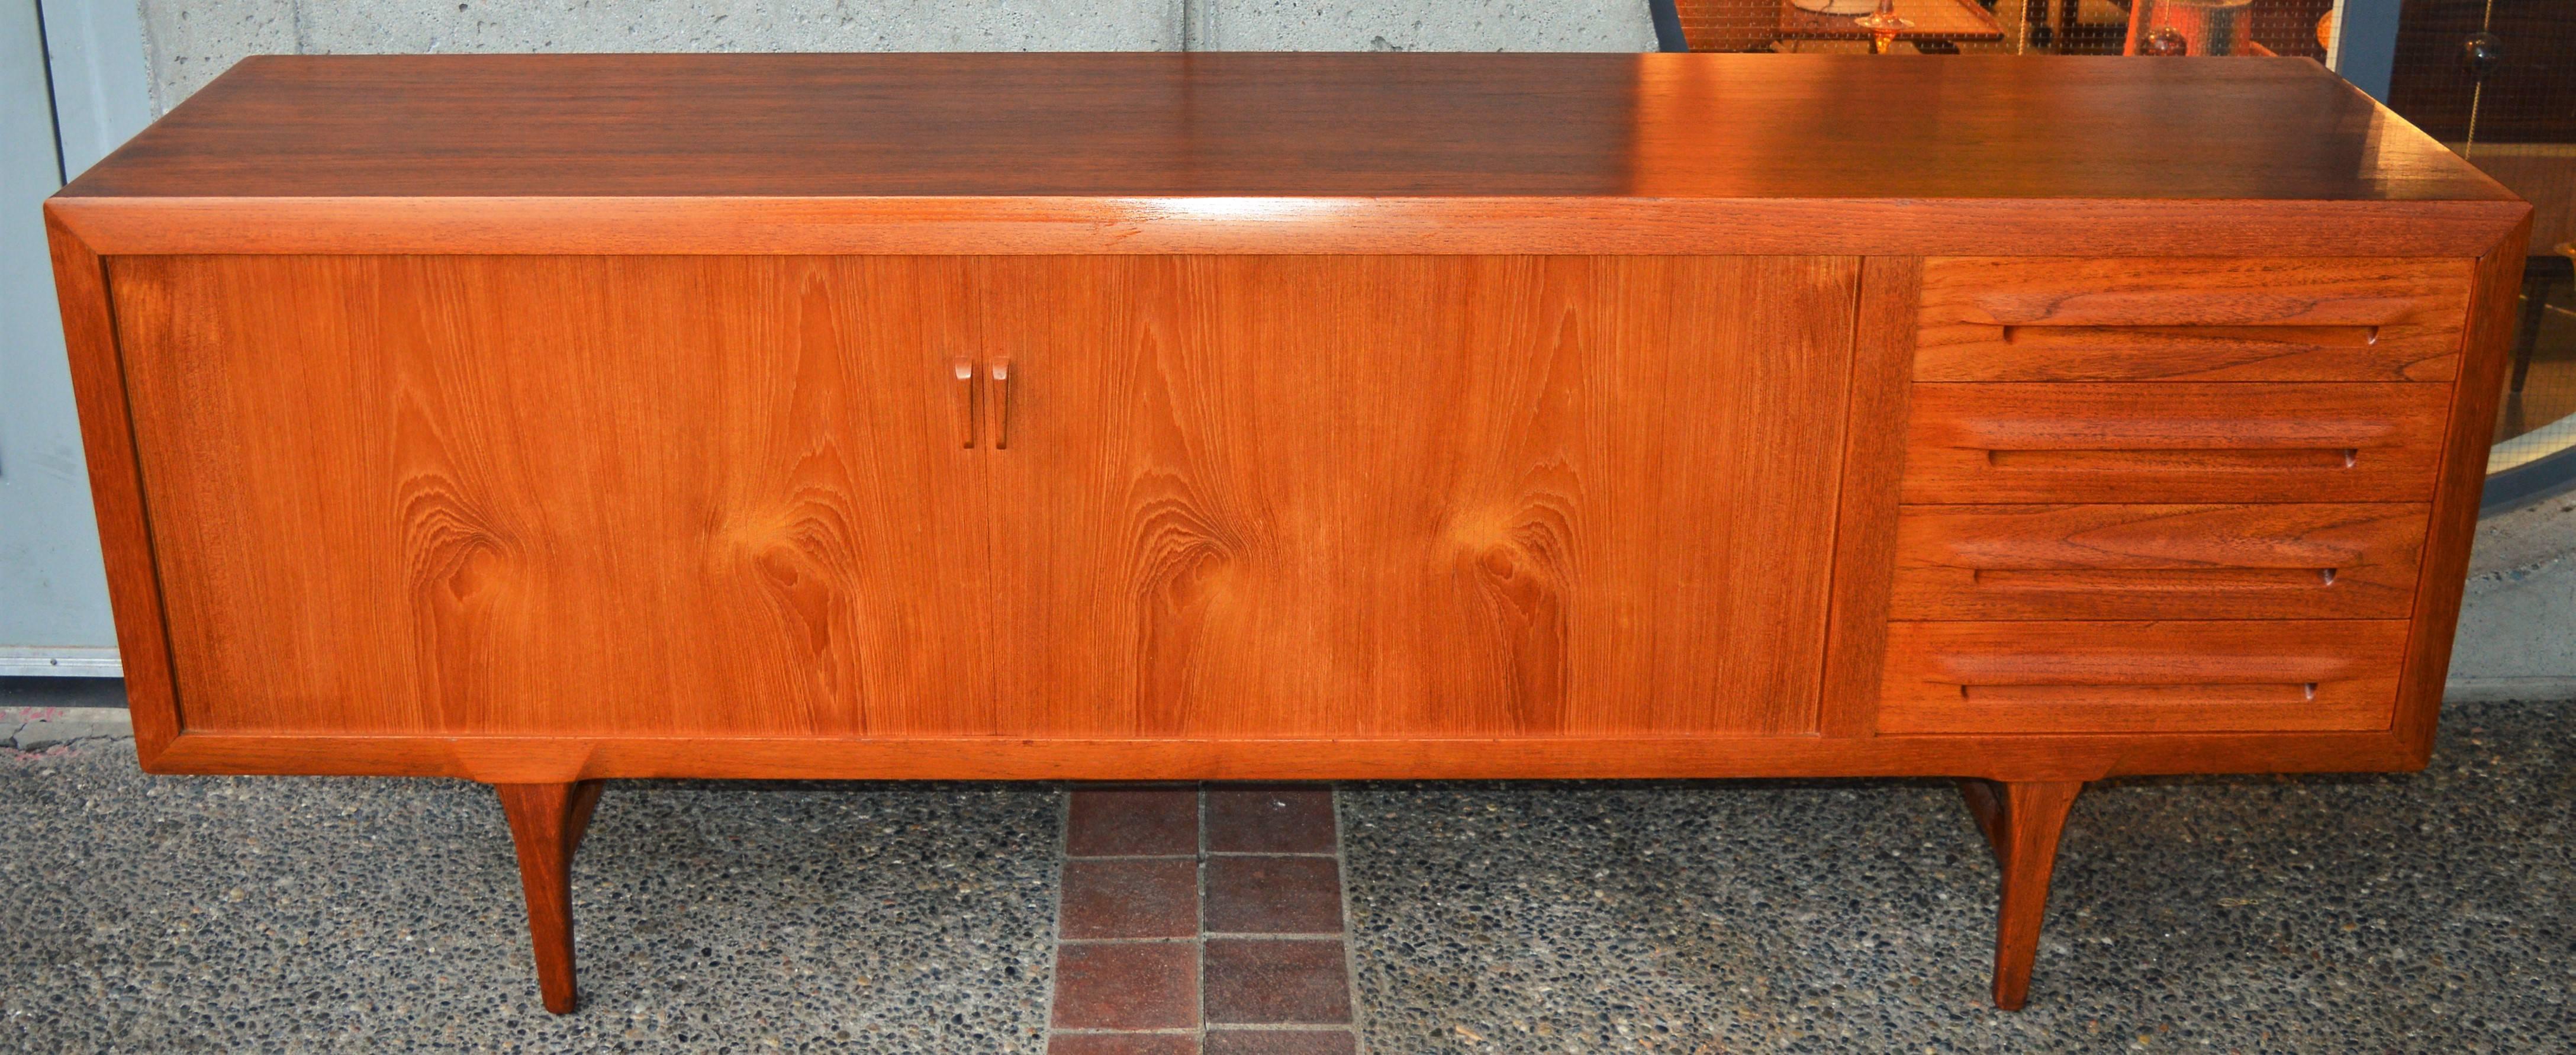 1950s Danish Teak Tambour Credenza by Ib Kofod-Larsen with Finished Back 2